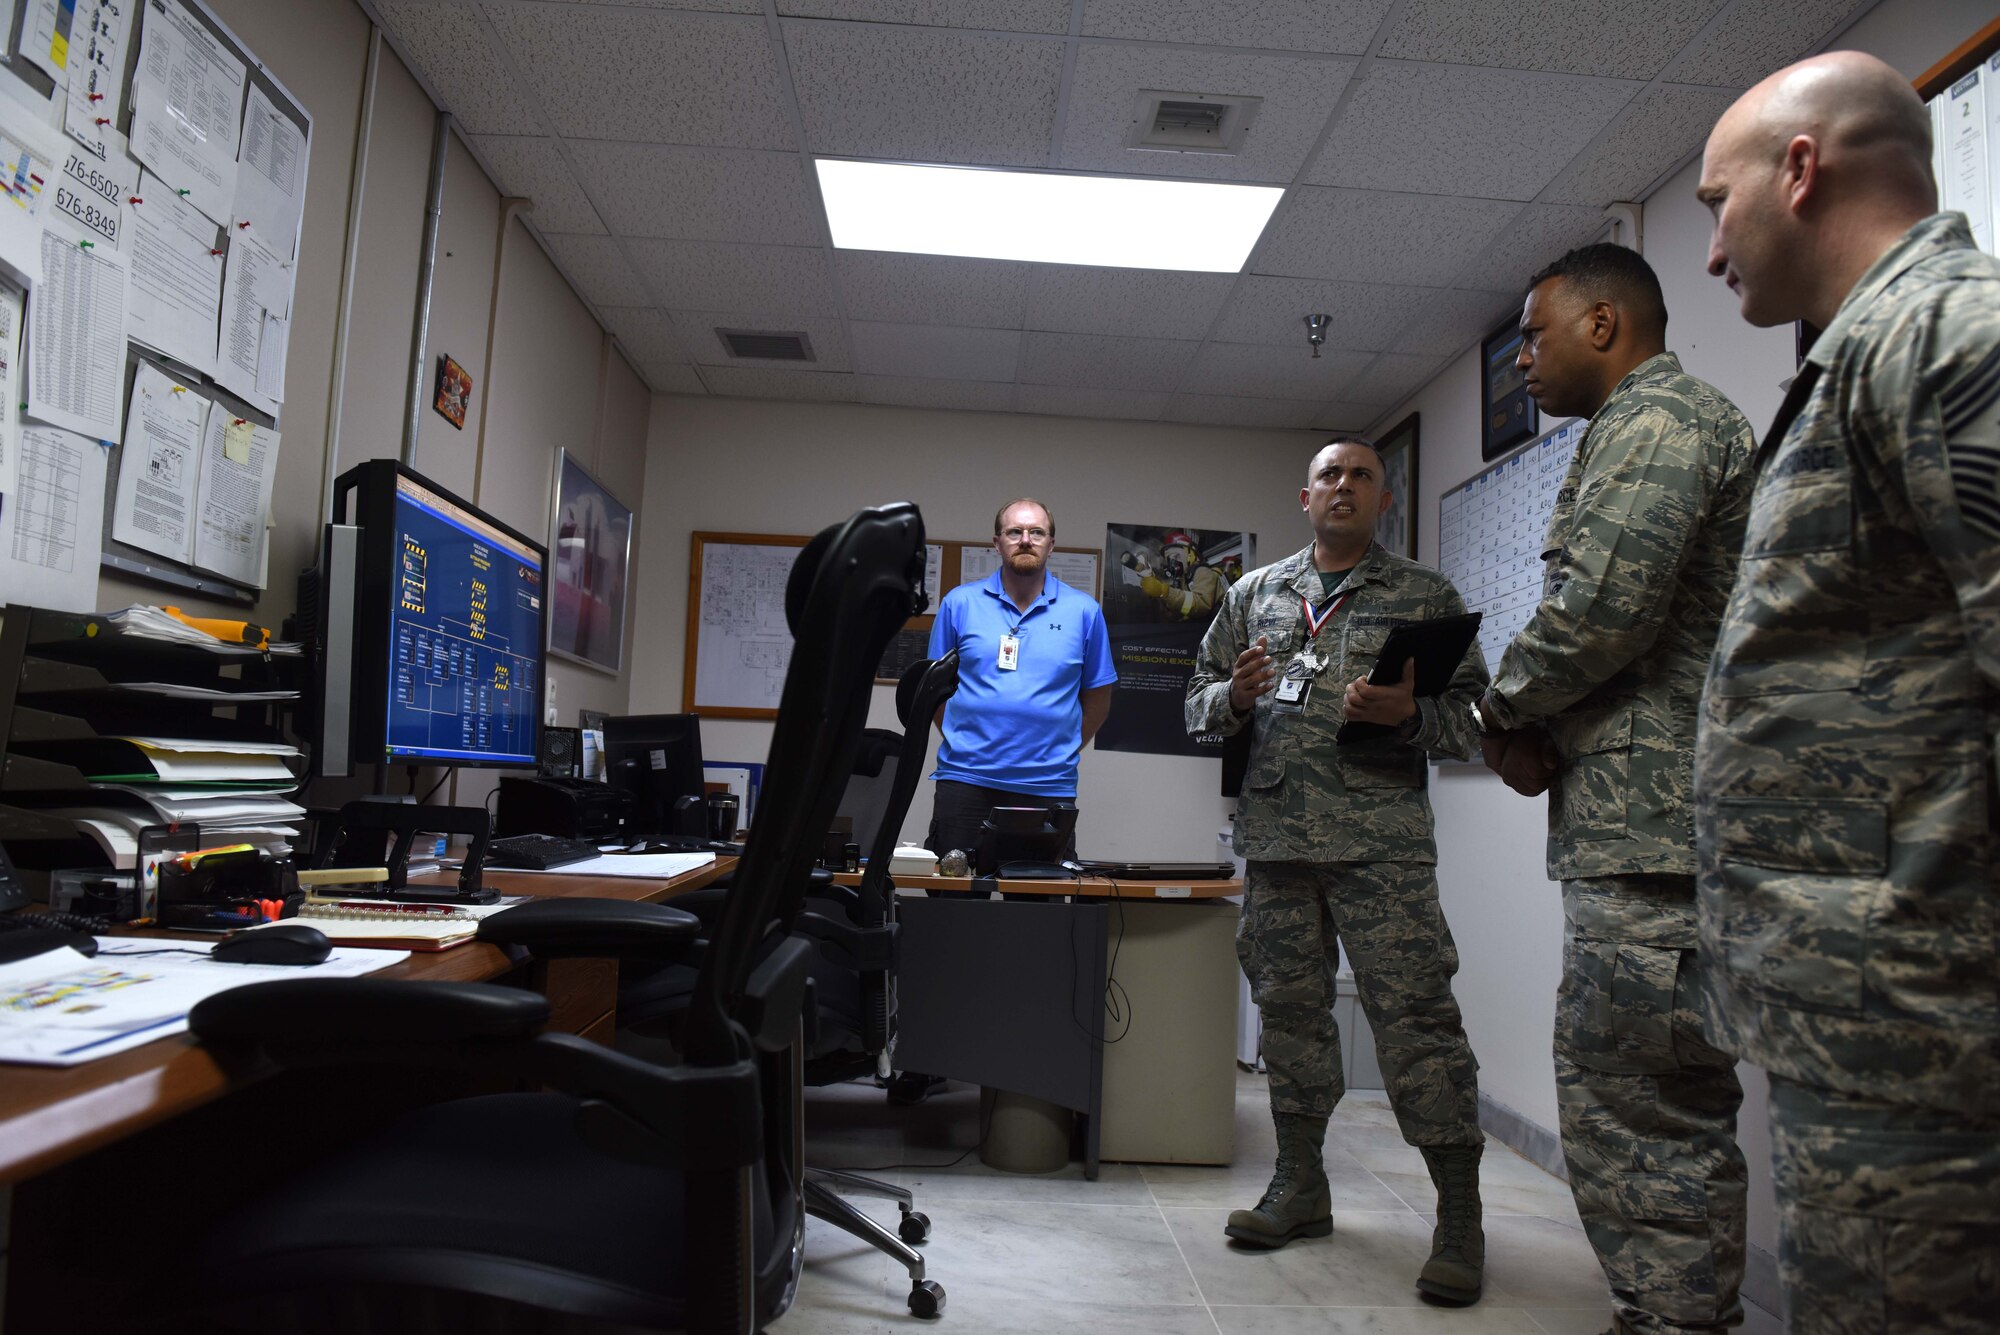 U.S. Air Force Lt. Gen. Richard M. Clark, 3rd Air Force commander, and Chief Master Sgt. Anthony Cruz-Munoz, 3rd Air Force command chief, receive a briefing from 39th Medical Group personnel at Incirlik Air Base, Turkey, Feb. 9, 2018.